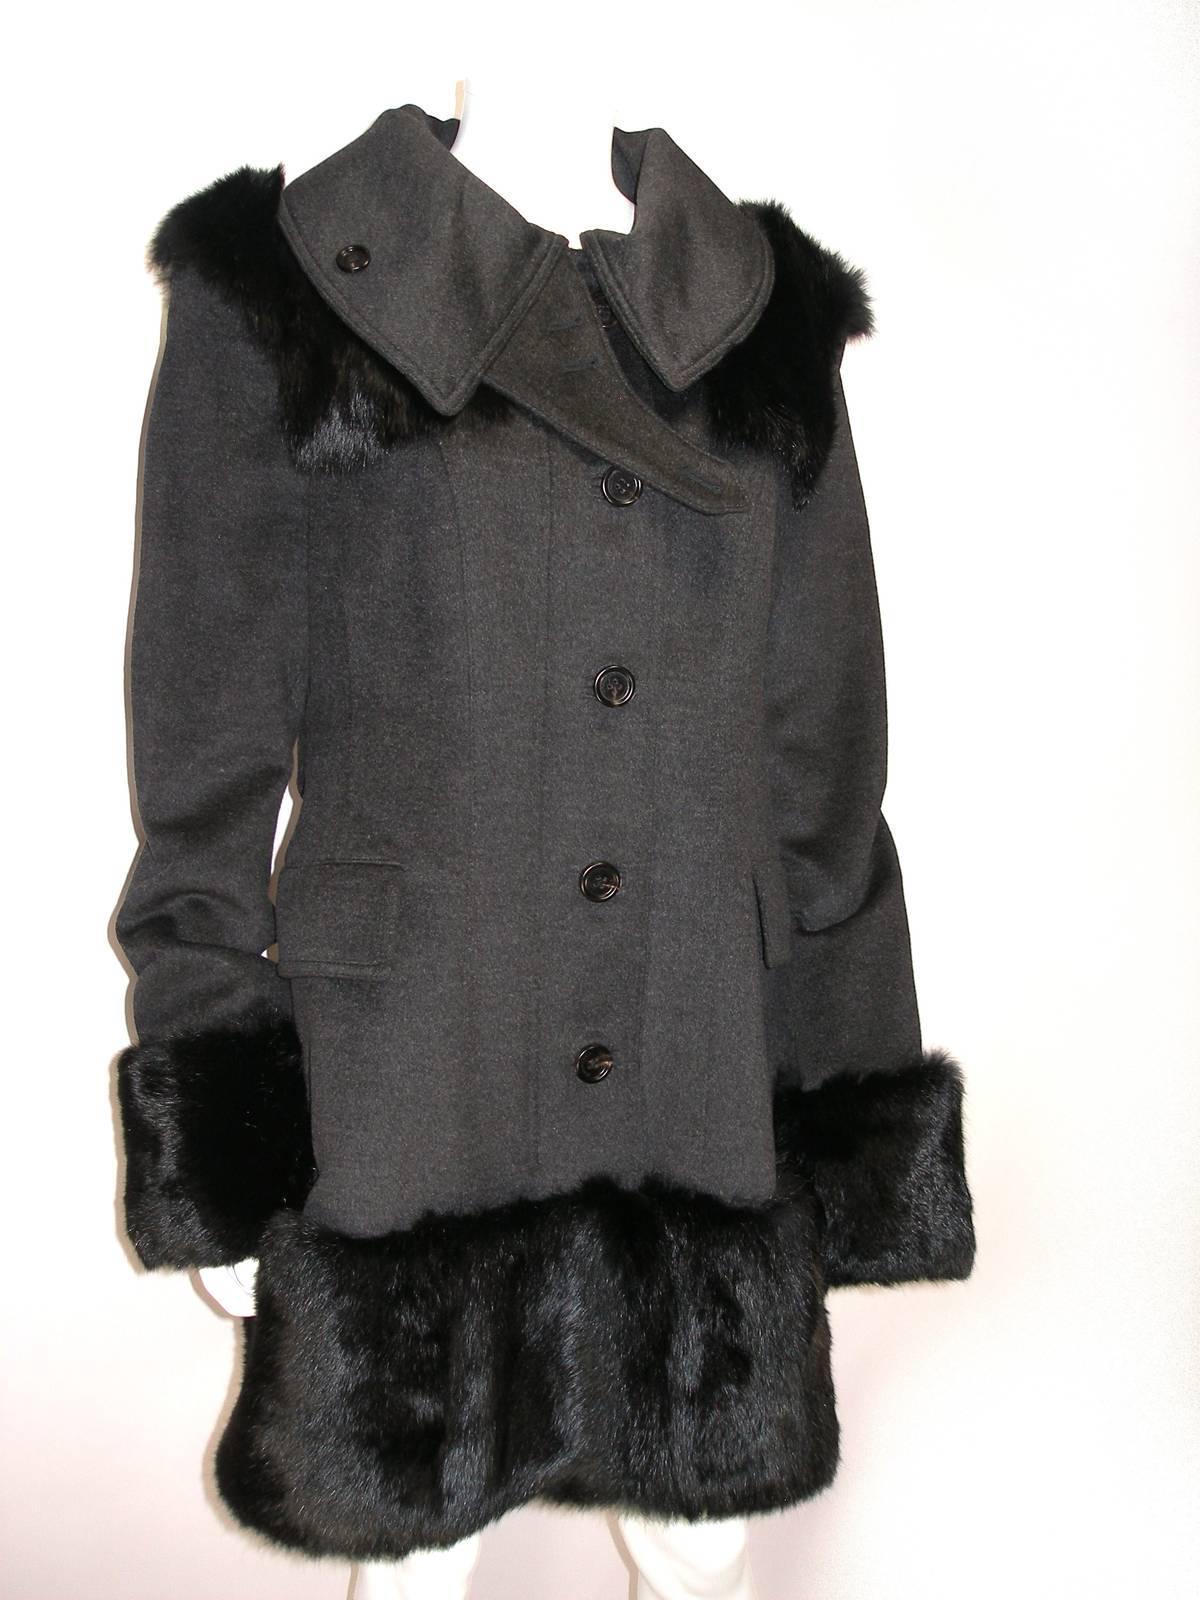 FANTASTIC Burberry Prorsum Coat
Grey color
Wool 85 %and cachemire  15 % and real fur rabbit 
Lining 100 % viscose
Size FR 44 or 14US
Like New
Mesures :
Shoulder : 44 cm 17.32 